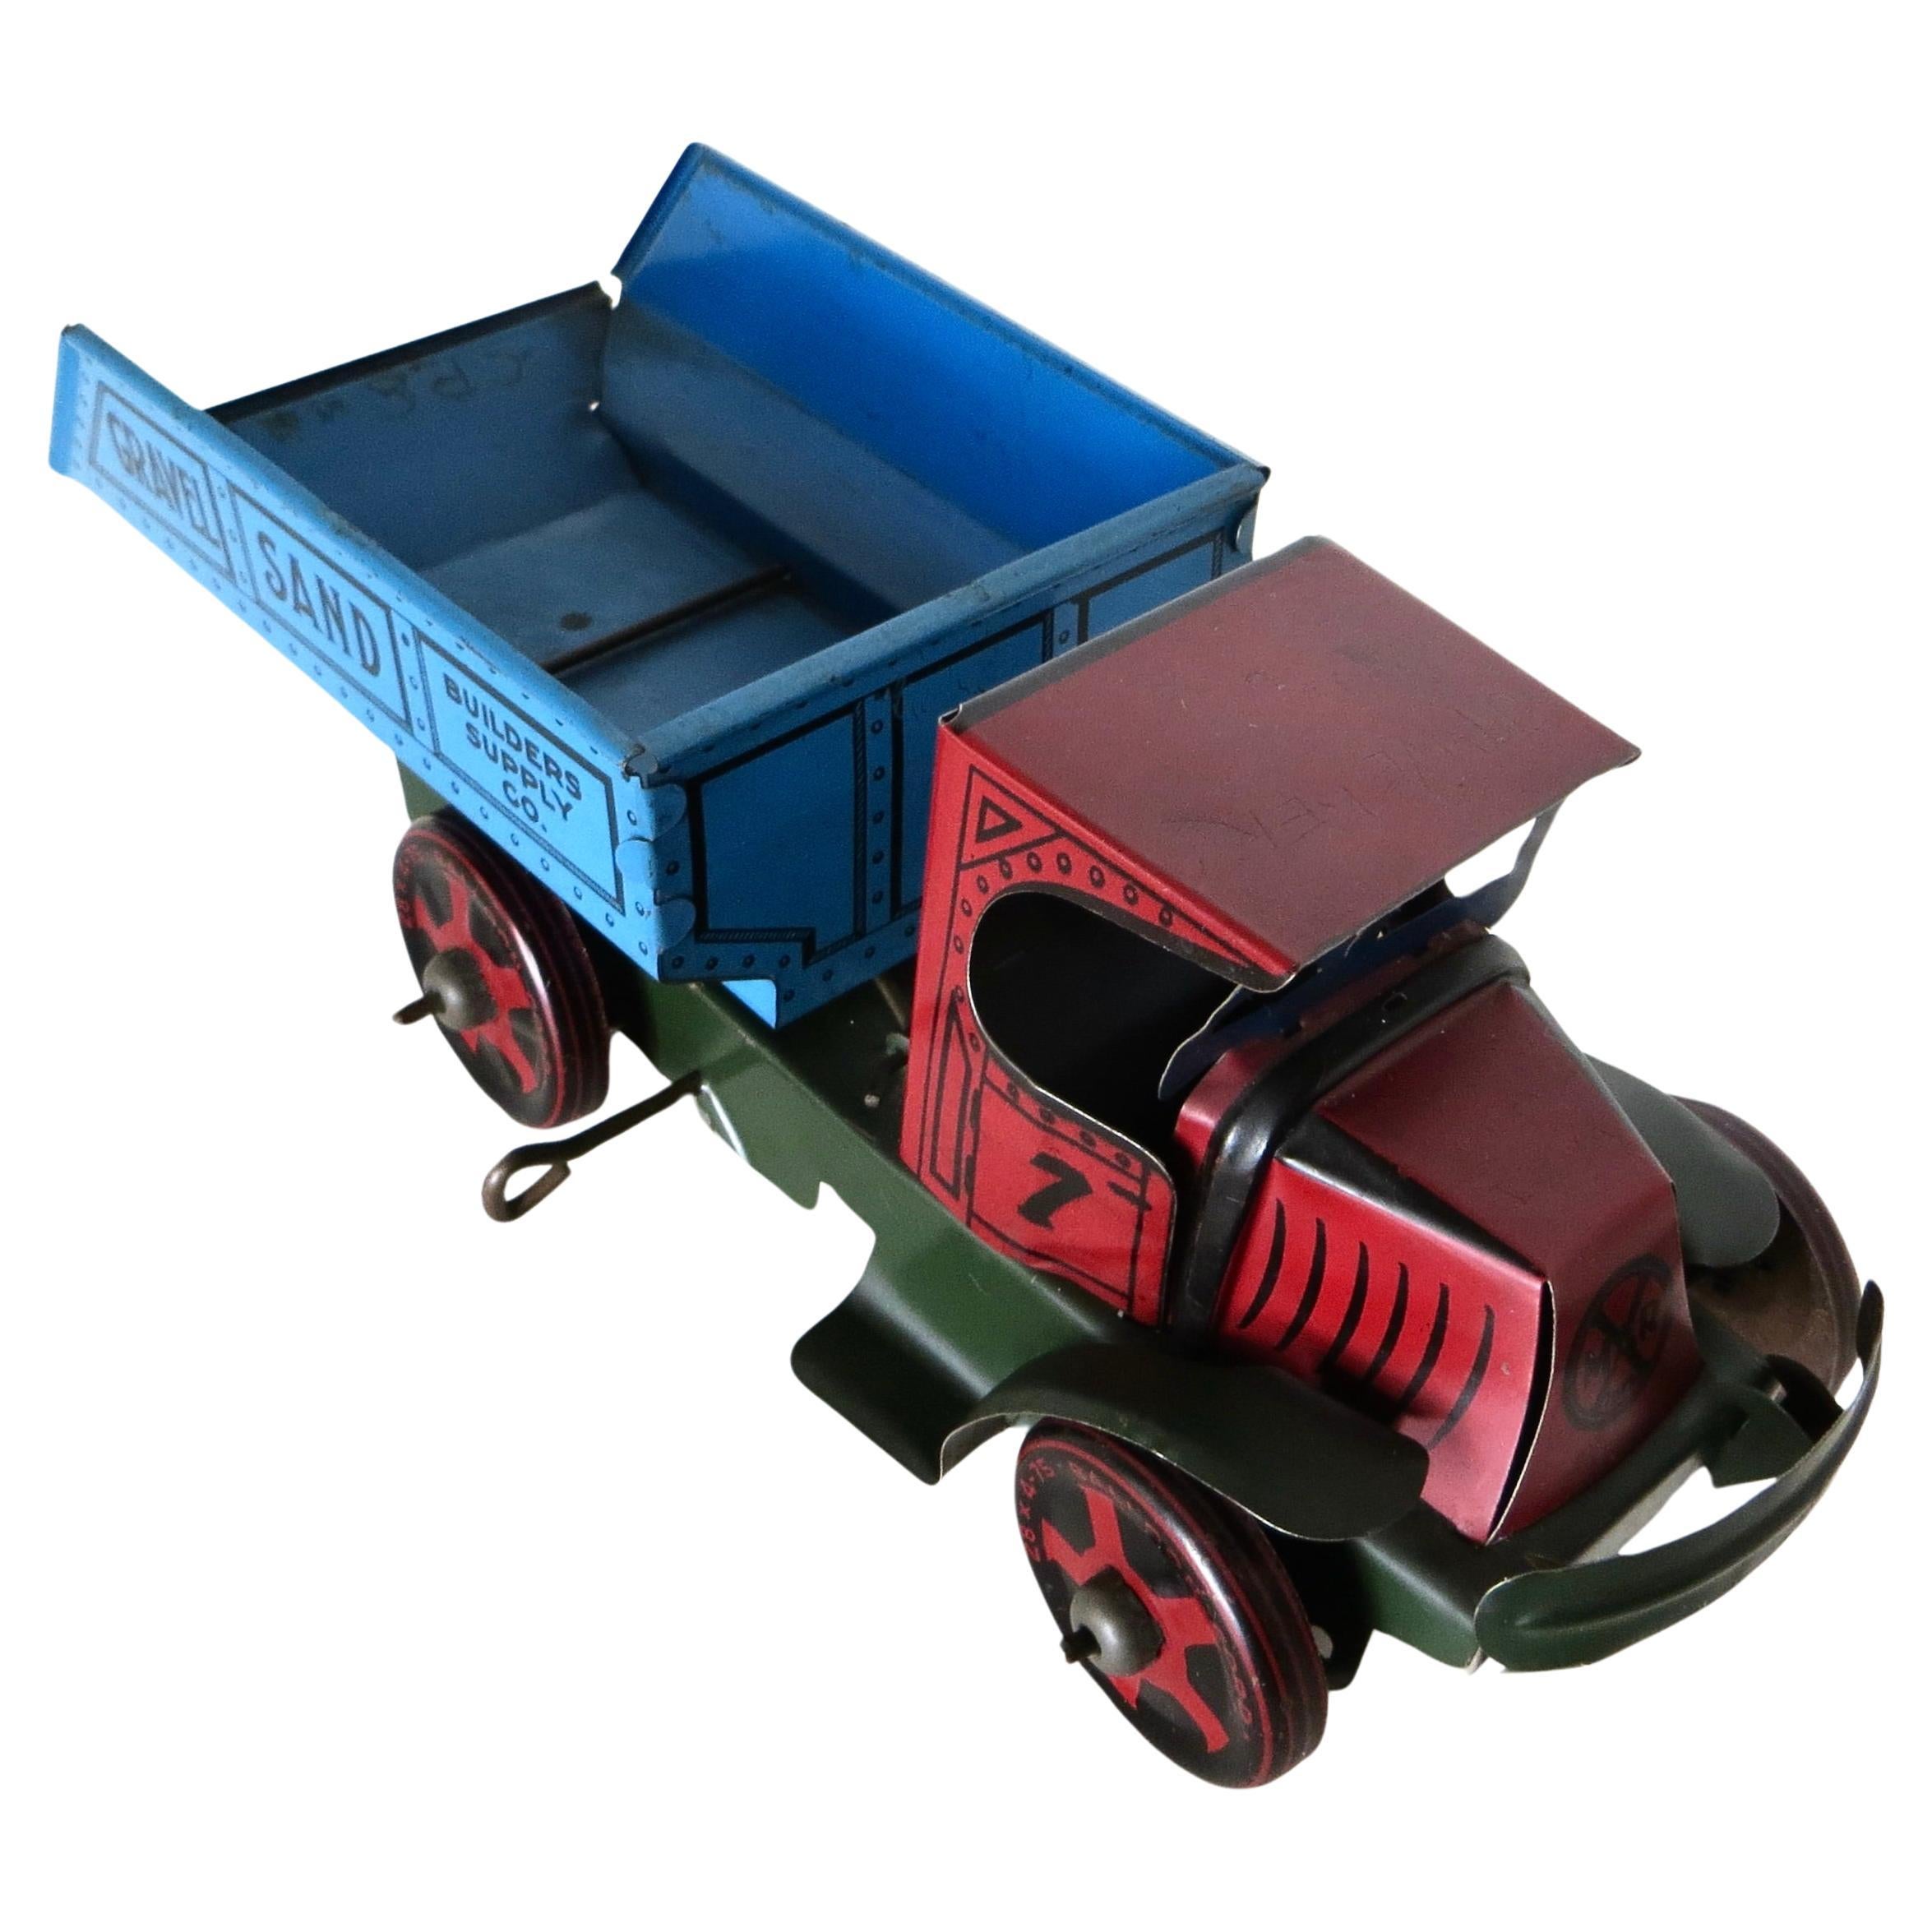 Vintage Toy Wind-Up Dump Truck by The Marx Toy Company, N.Y. American Circa 1930